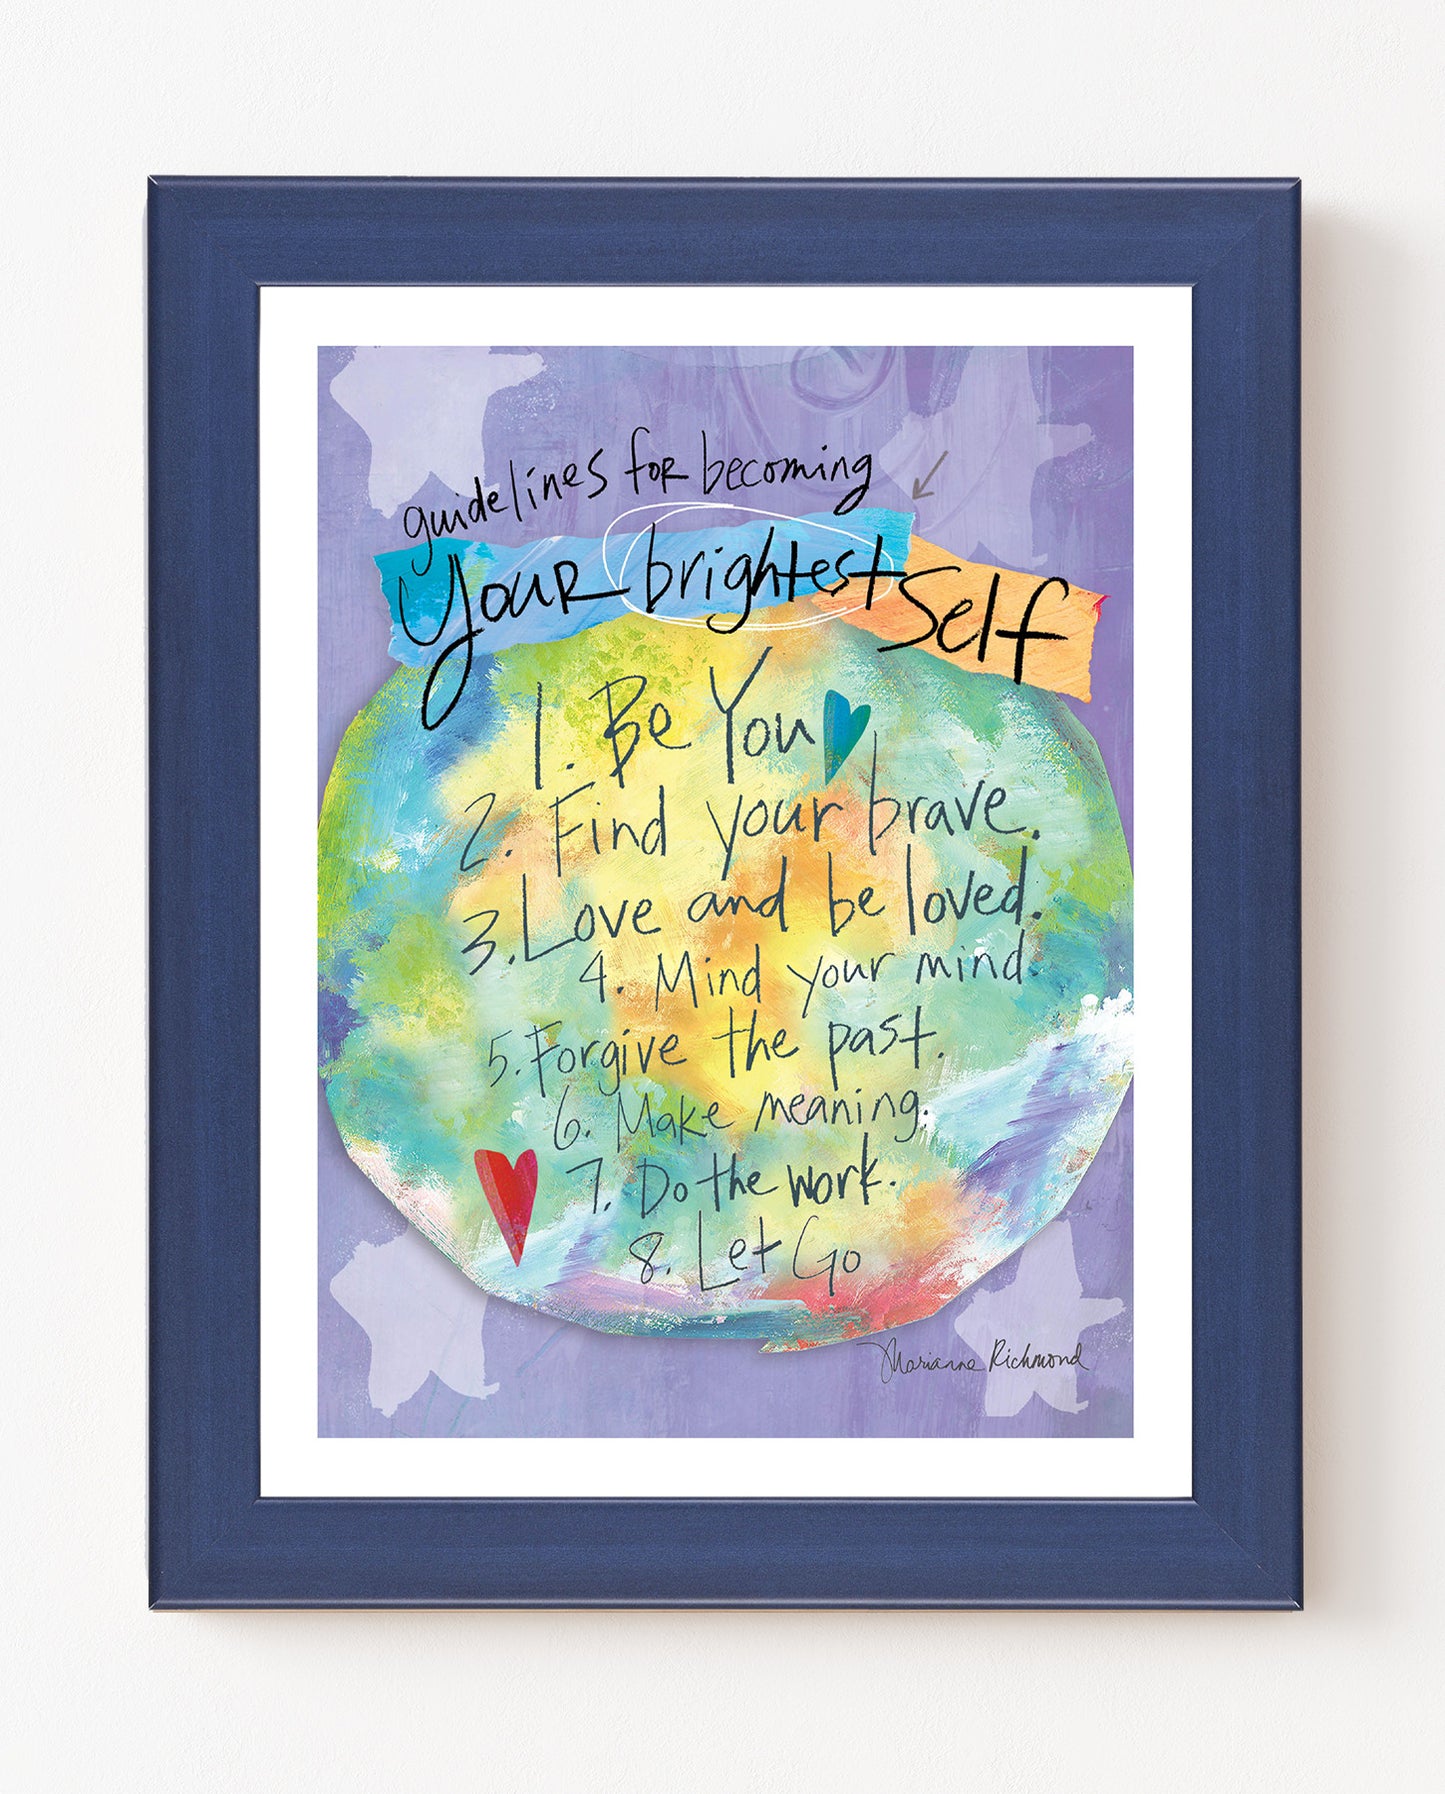 ART PRINT - Becoming your Brightest Self (World)